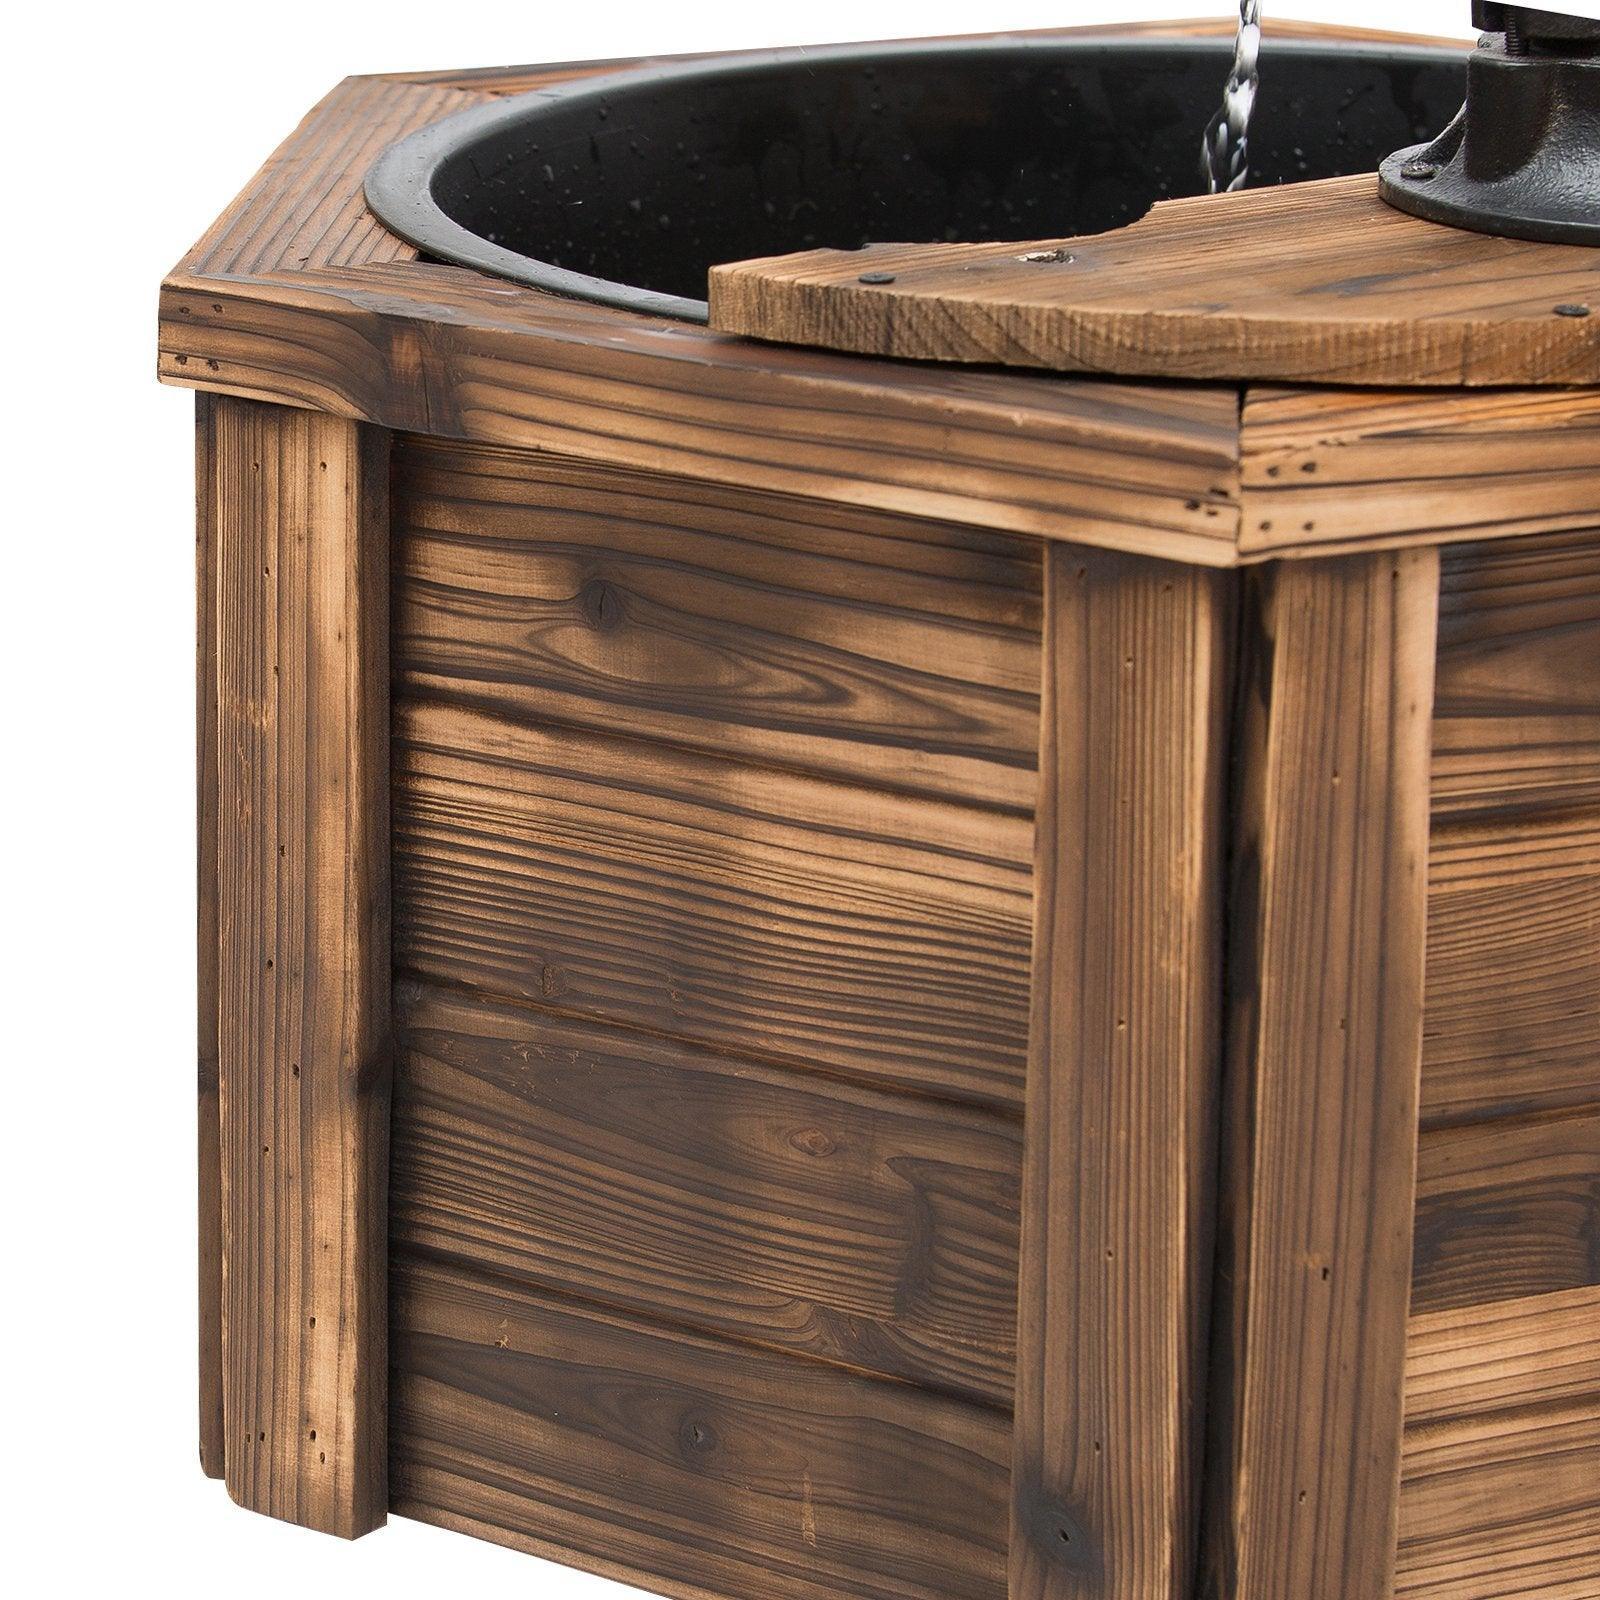 Outsunny Wooden Electric Water Fountain - Oasis 220V - ALL4U RETAILER LTD